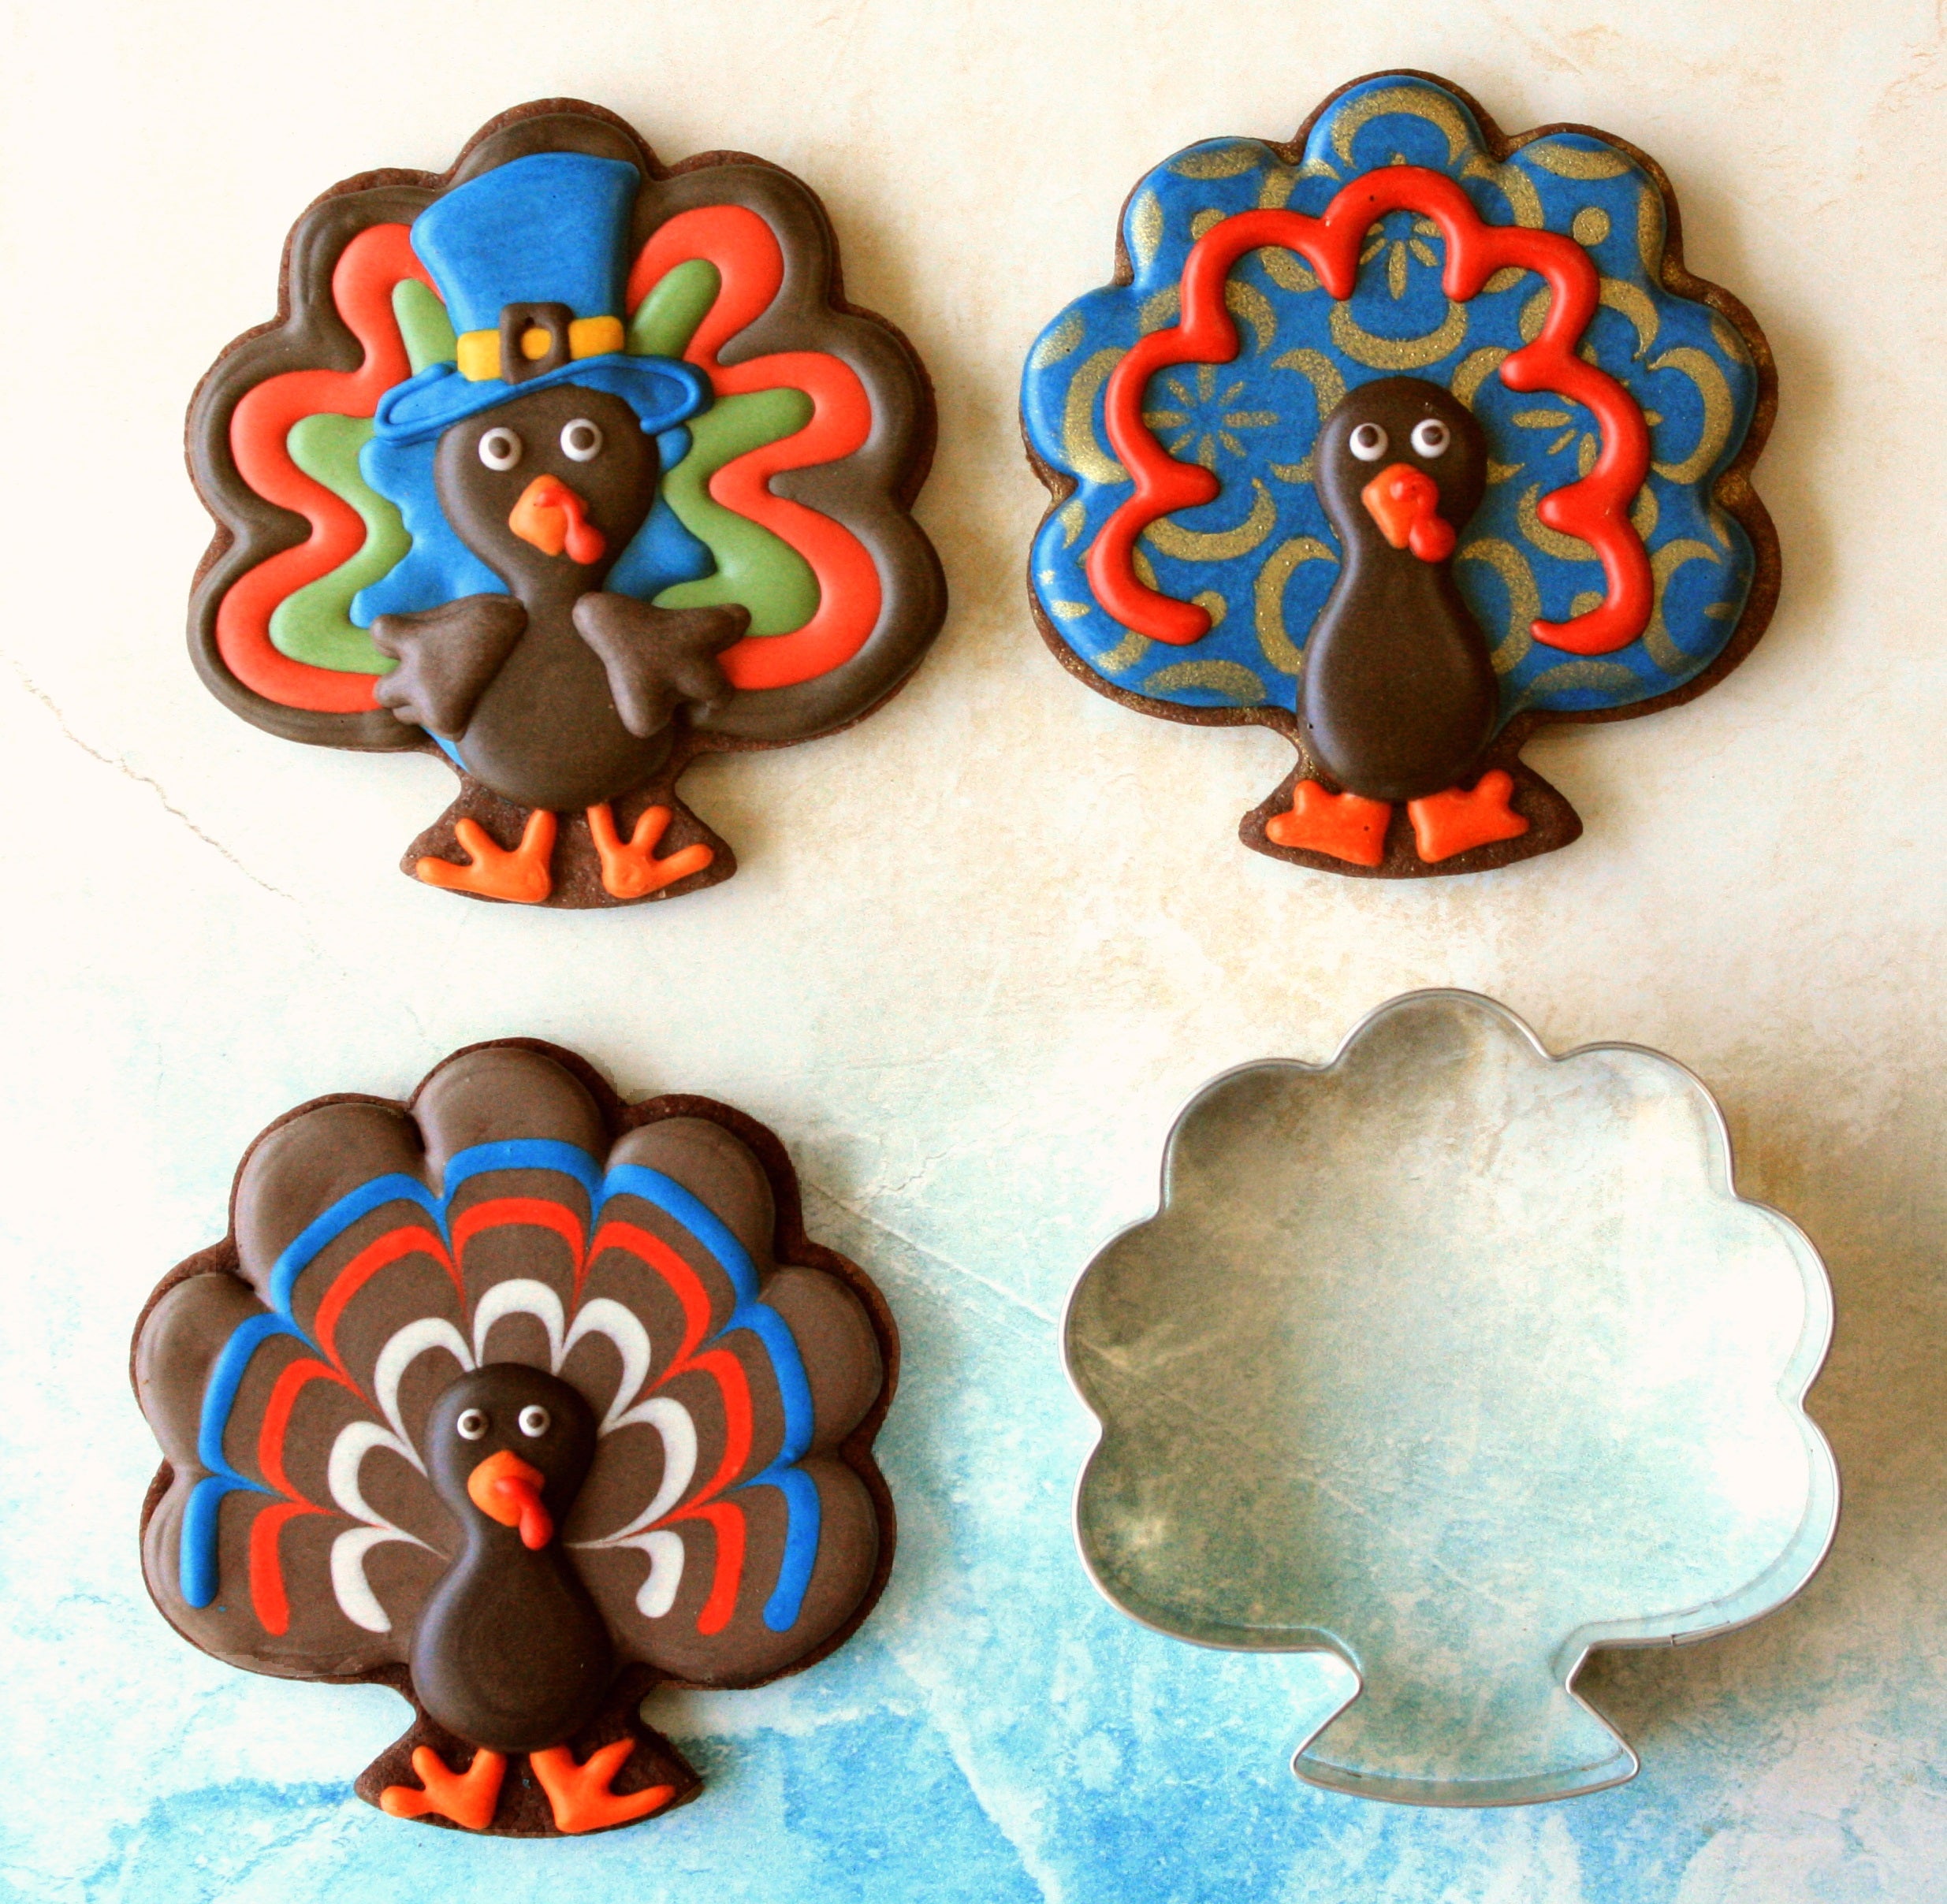 chocolate cookies shaped like turkeys with royal icing and a turkey cookie cutter on a white background